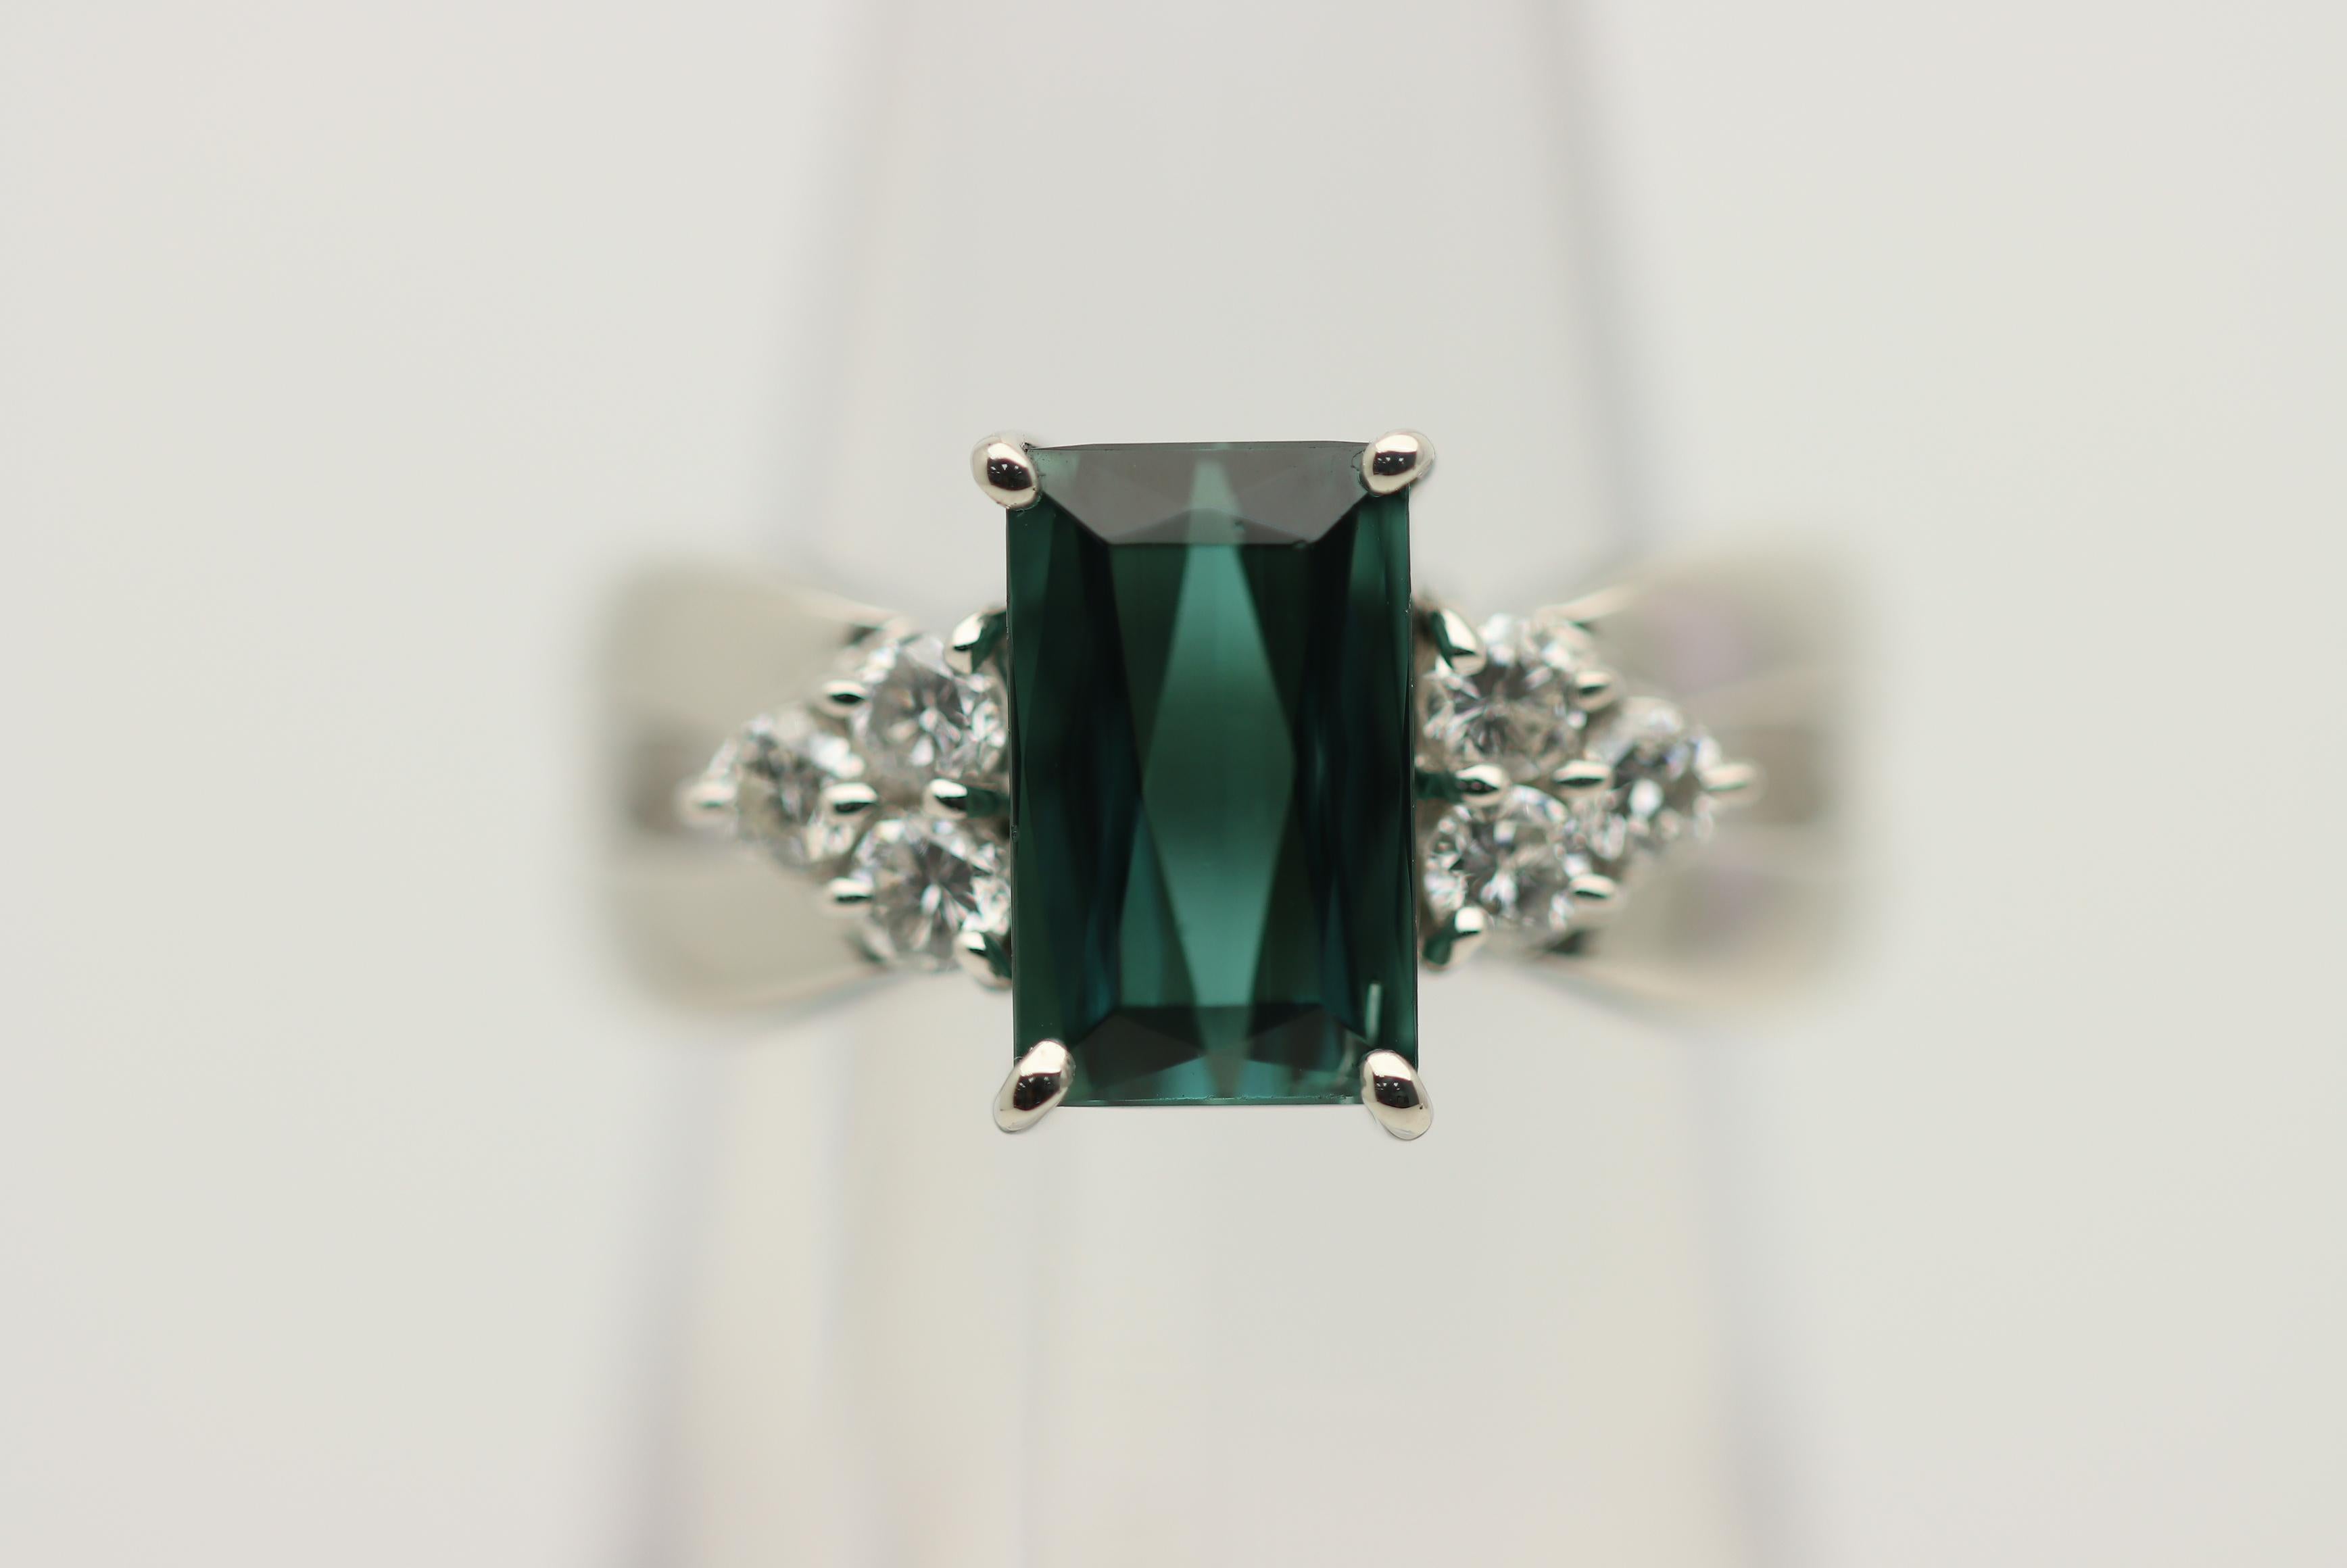 A unique and stylish ring featuring a gem indicolite tourmaline. It weighs 2.52 carats and has the most pleasing green-blue color that is crystal clear and appears to vibrate in the light. It is complemented by 0.35 carats of diamonds set on its